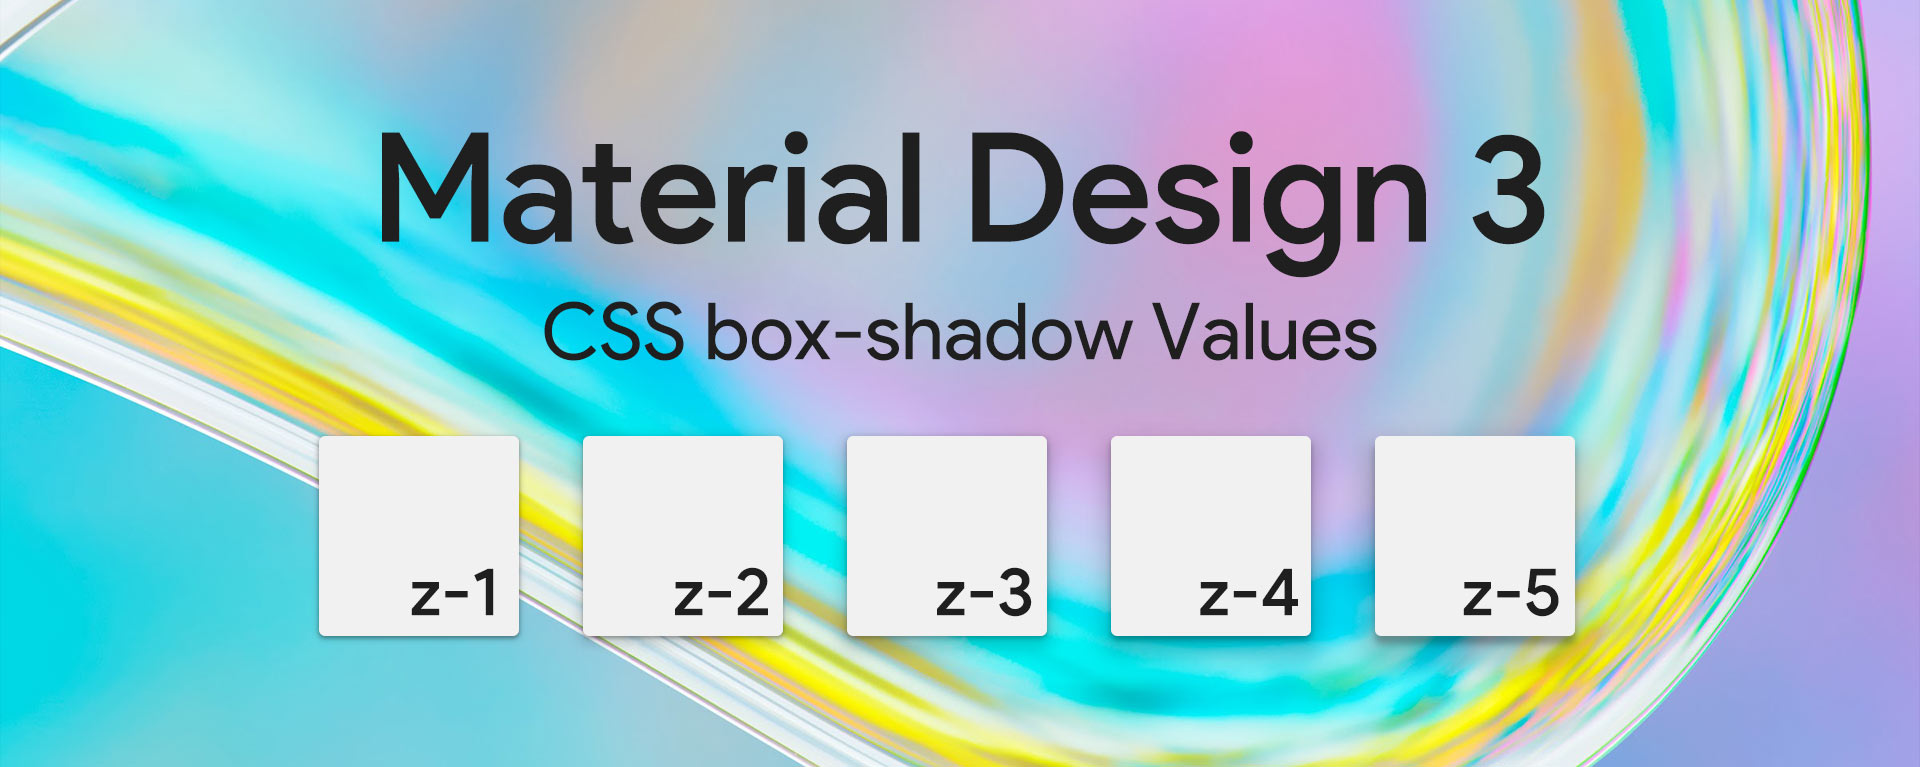 MD3 box-shadow CSS Feature Image